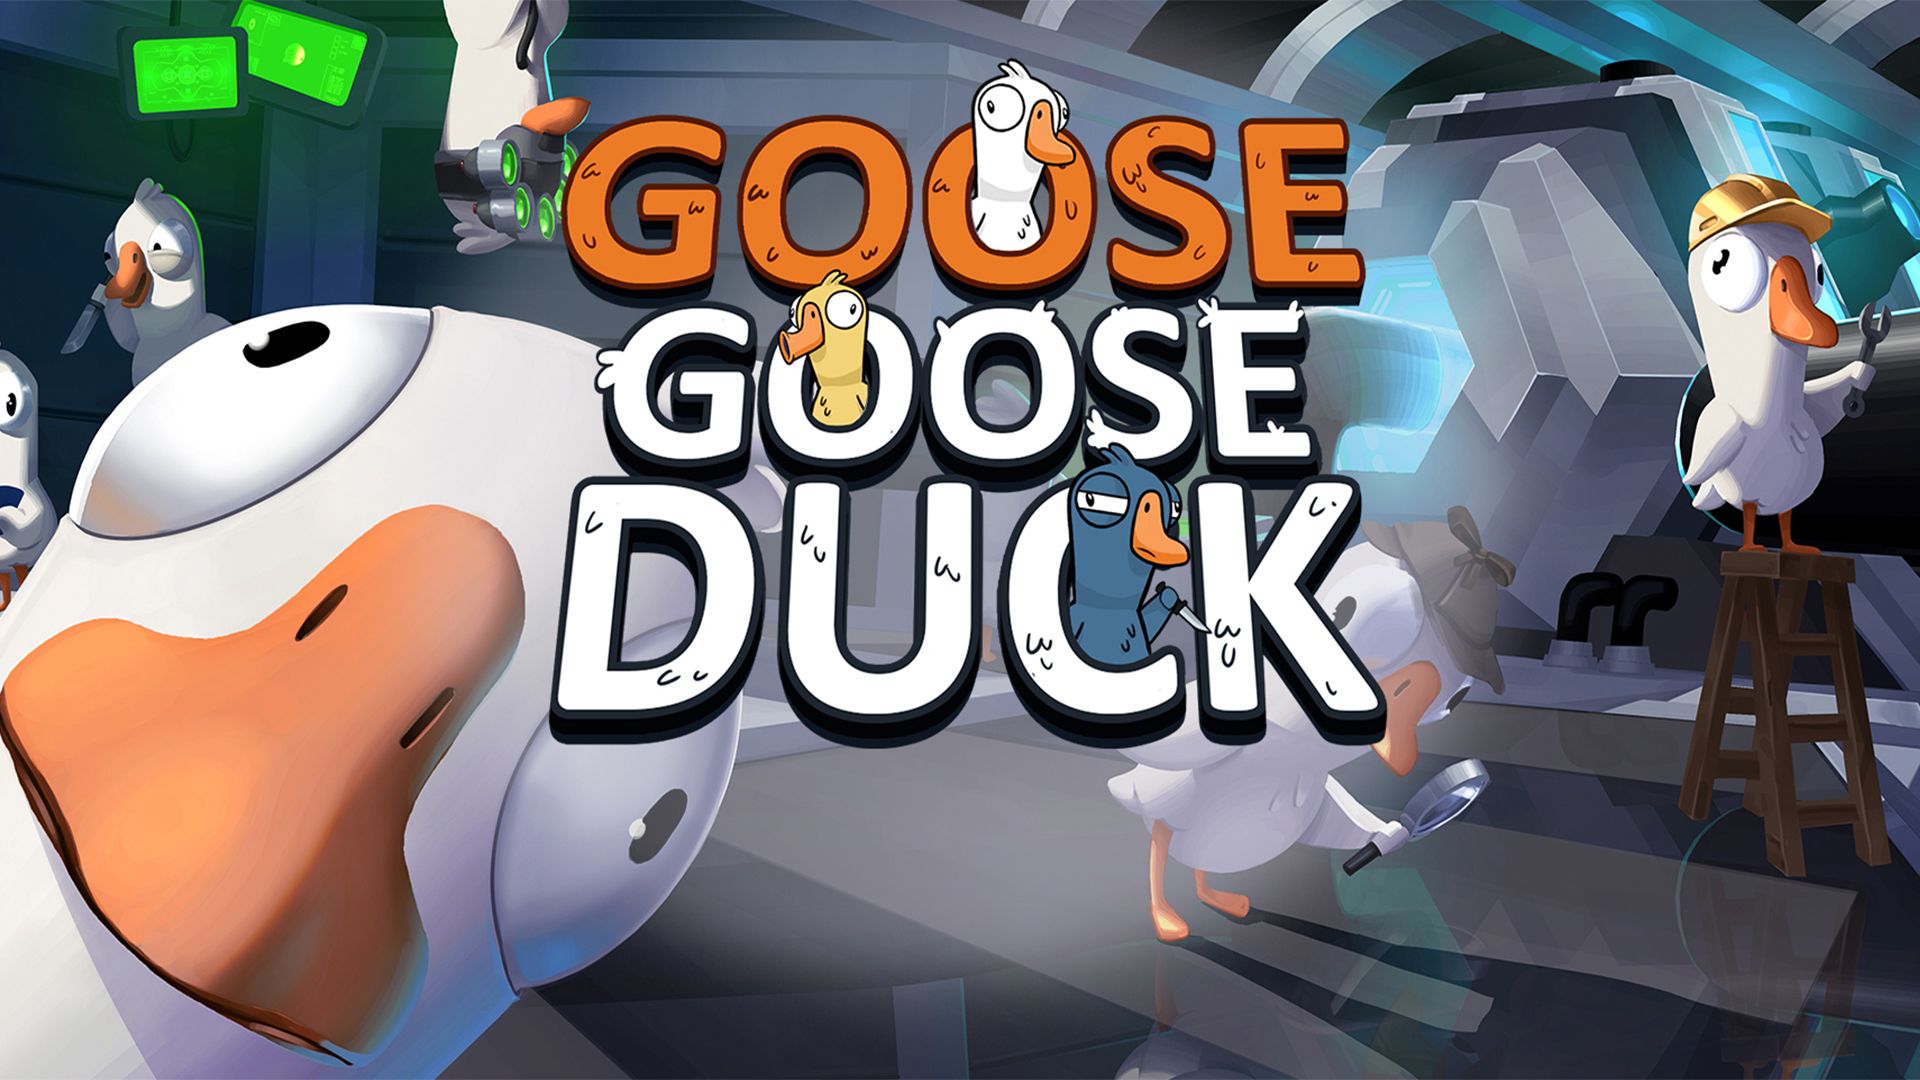 HD desktop wallpaper featuring Goose Goose Duck game graphics with animated geese characters and bold title text.